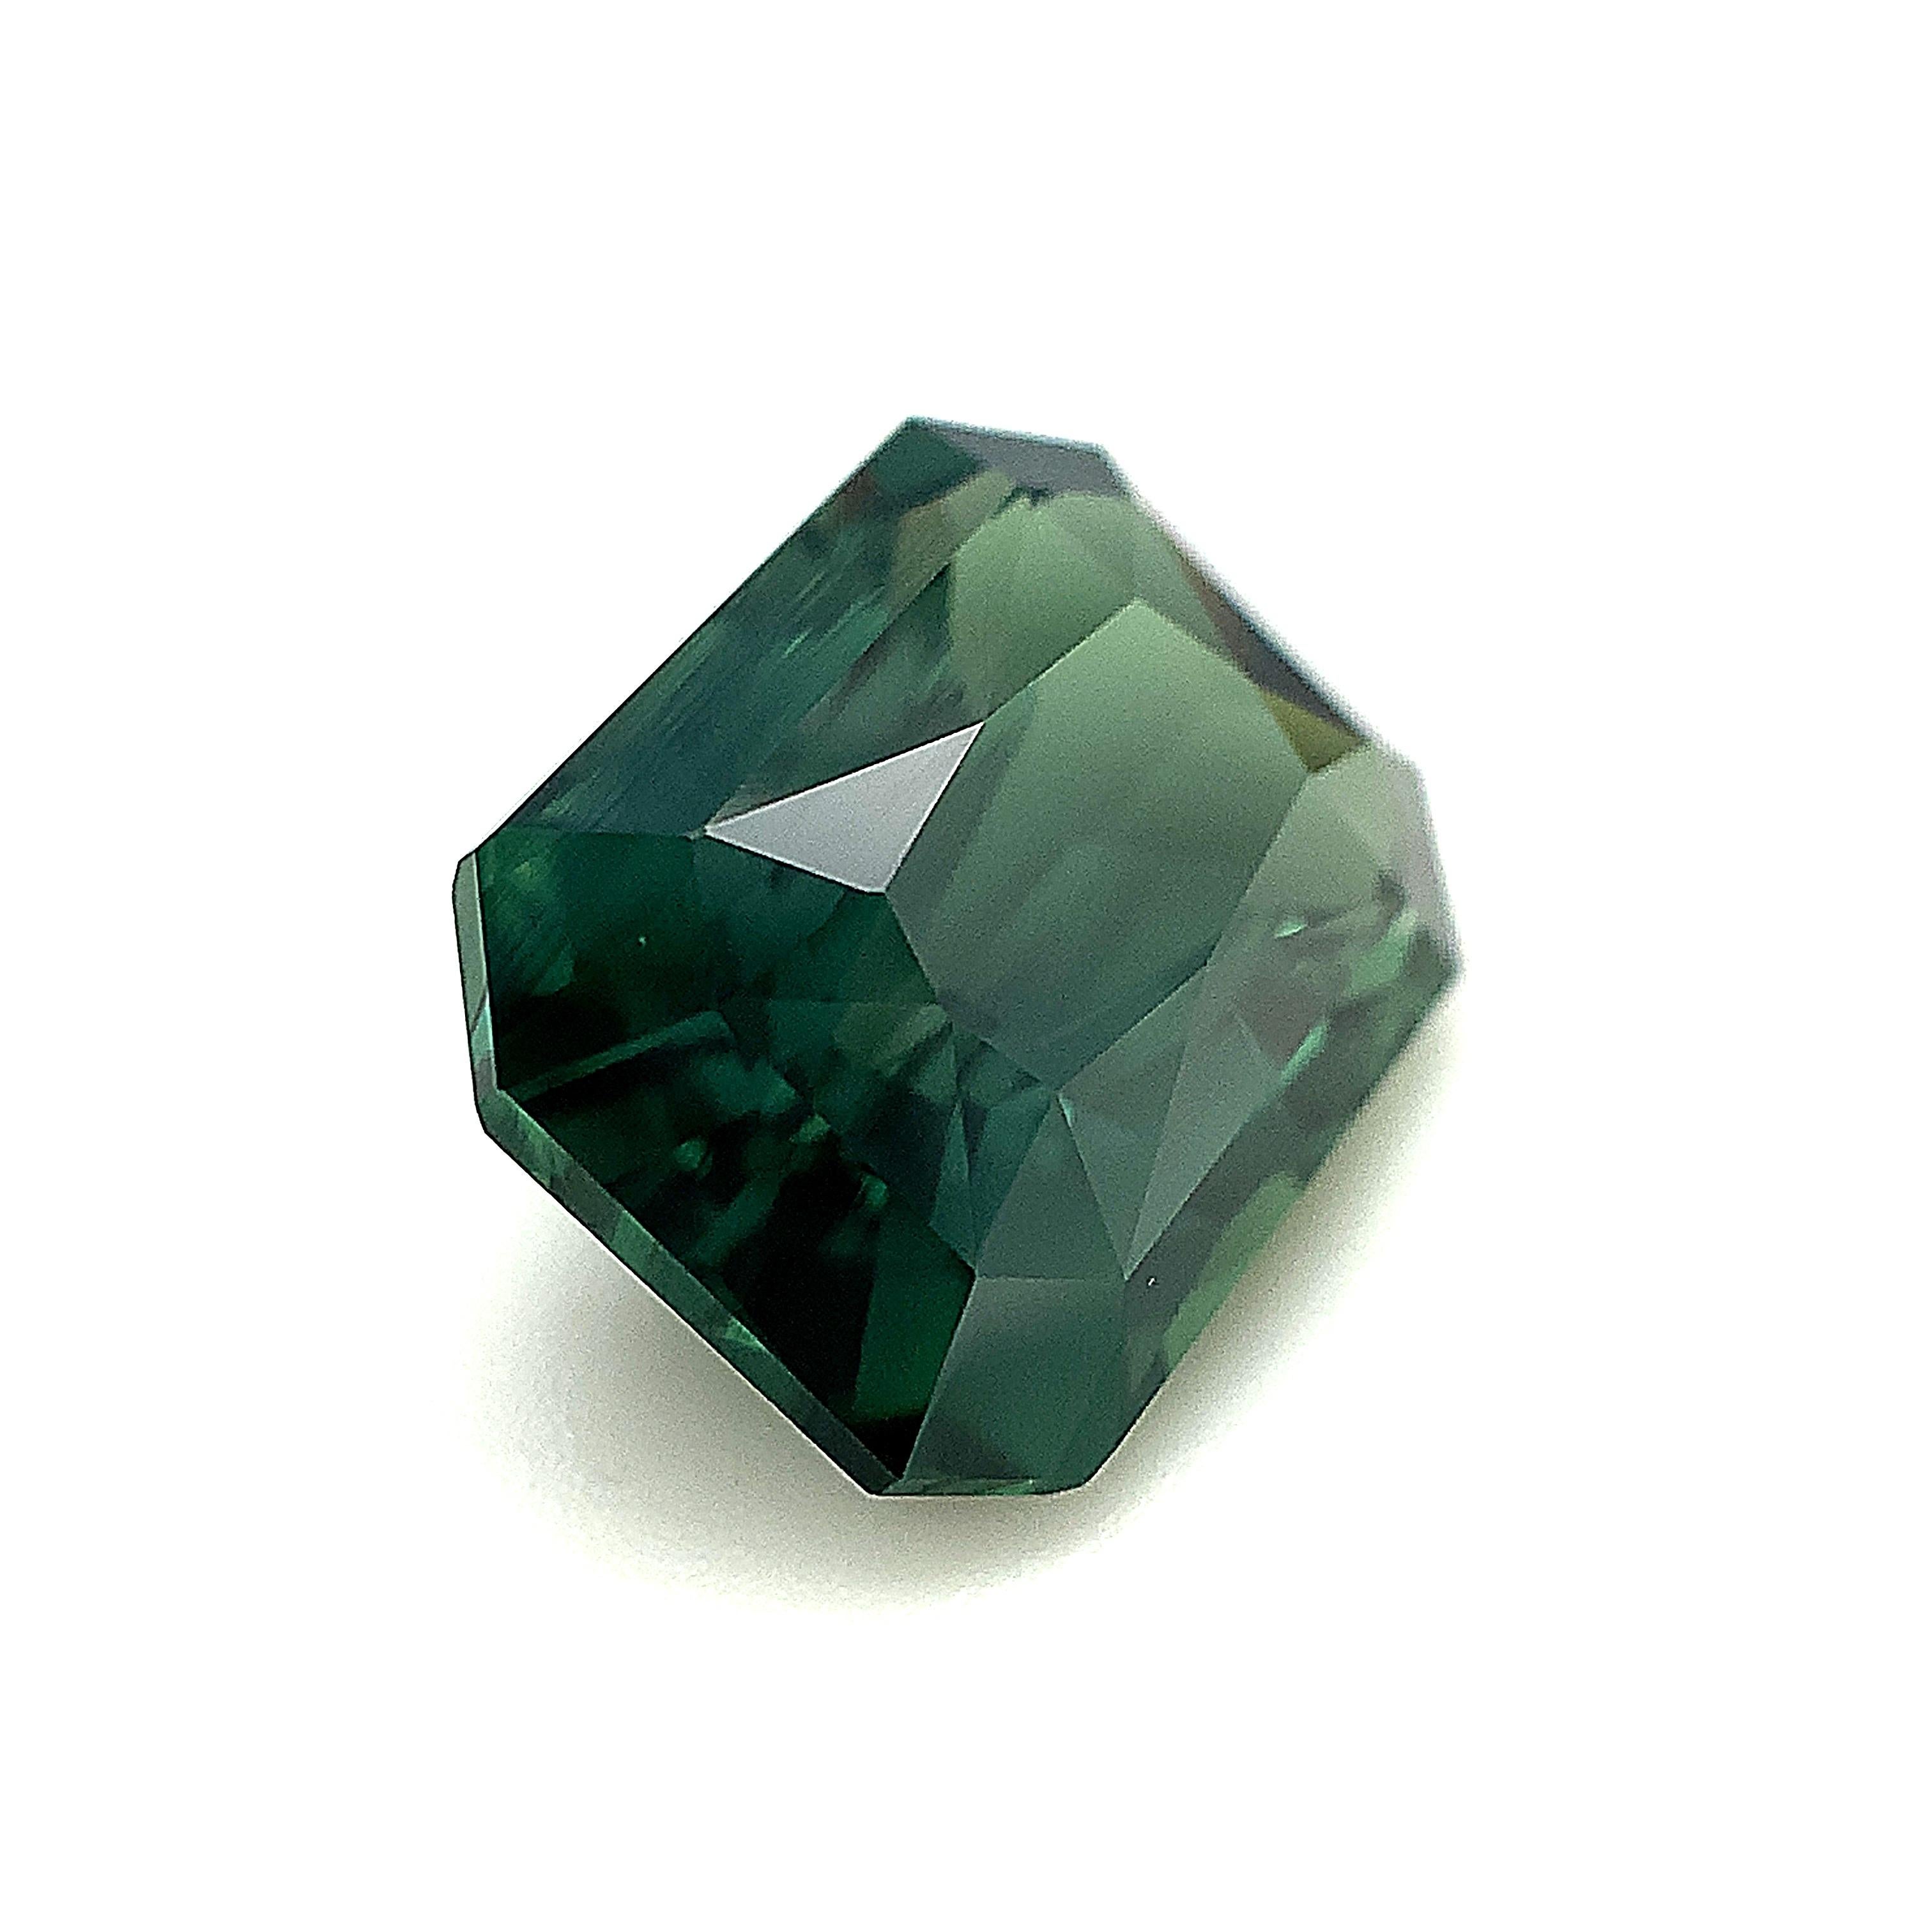 Octagon Cut Unheated 8.63 Carat Blue Green Sapphire, Loose Gemstone, GIA Certified  For Sale